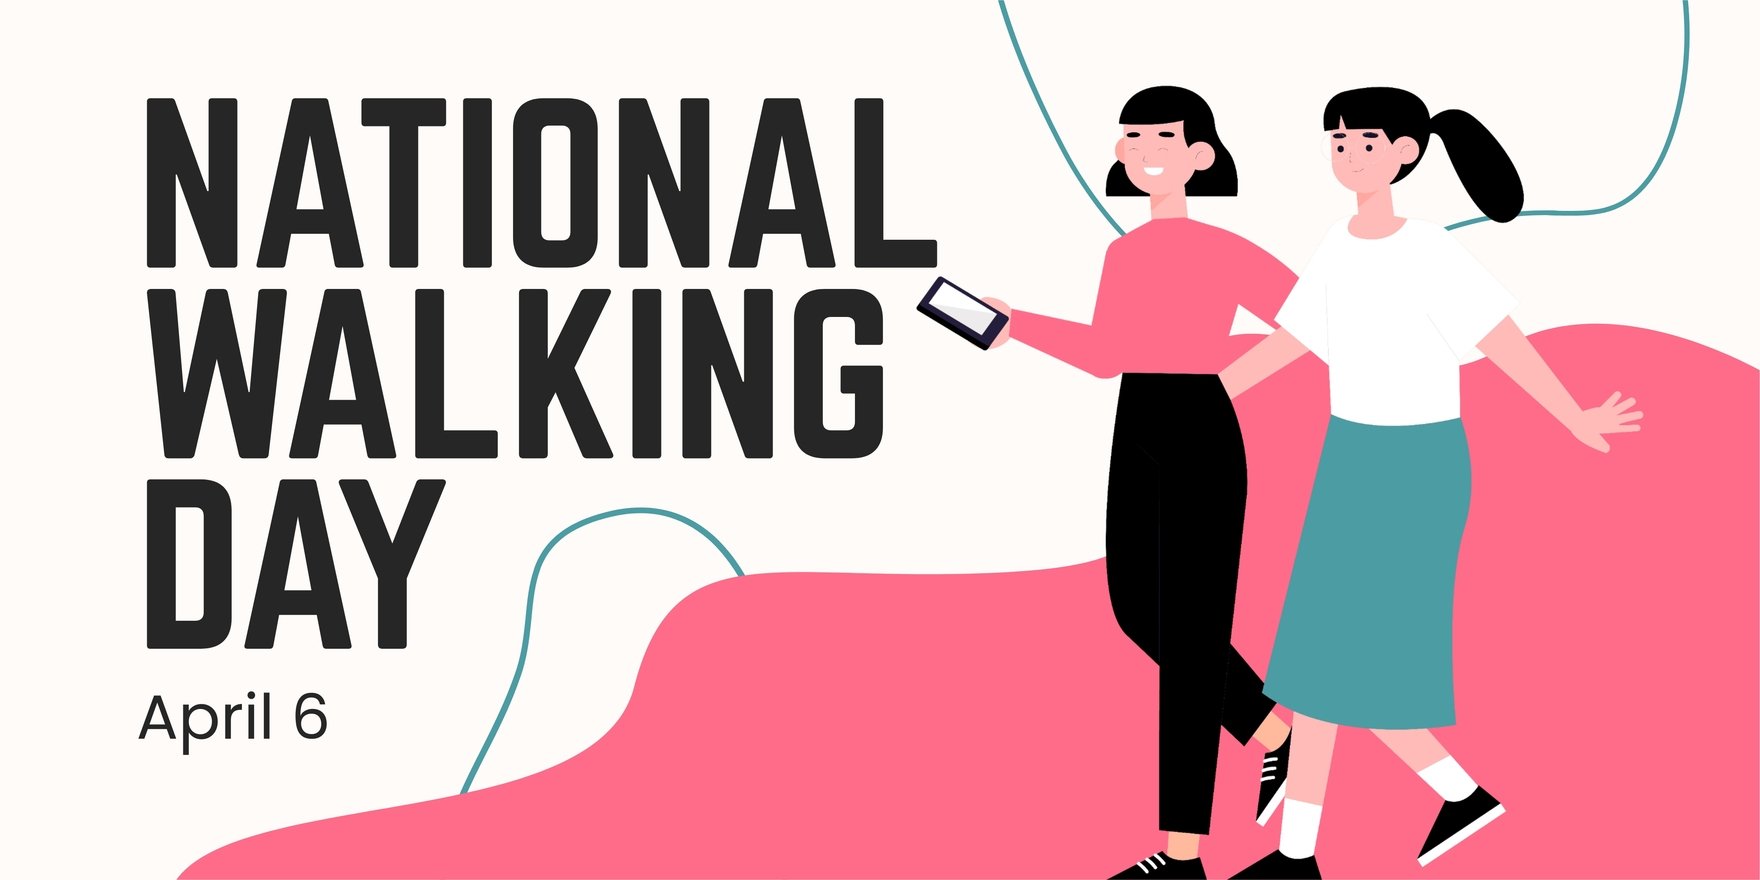 Free National Walking Day Banner Download in PNG, JPG